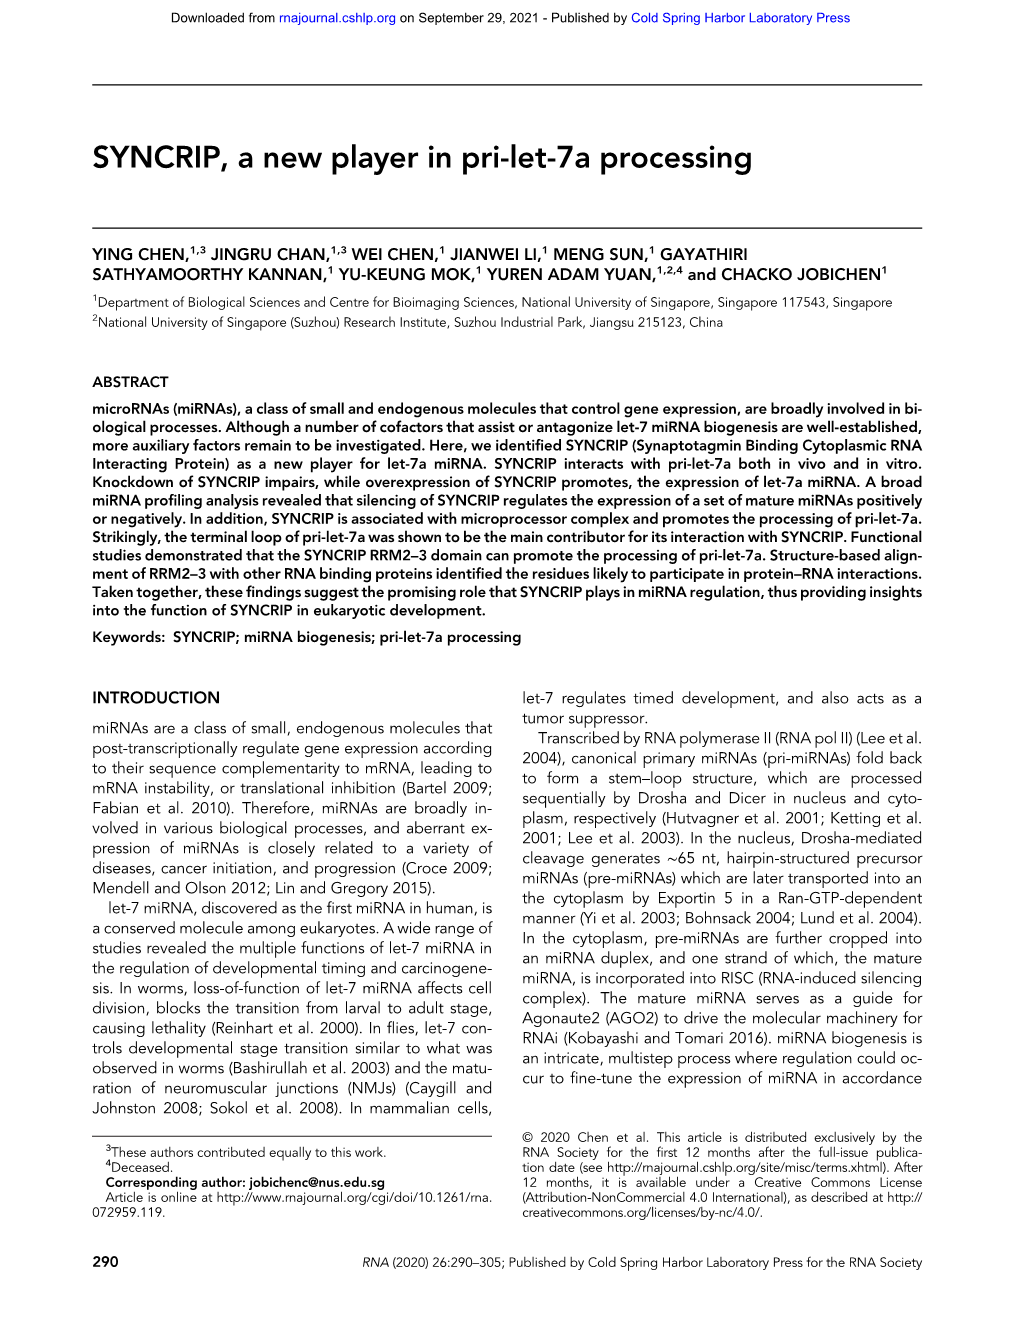 SYNCRIP, a New Player in Pri-Let-7A Processing